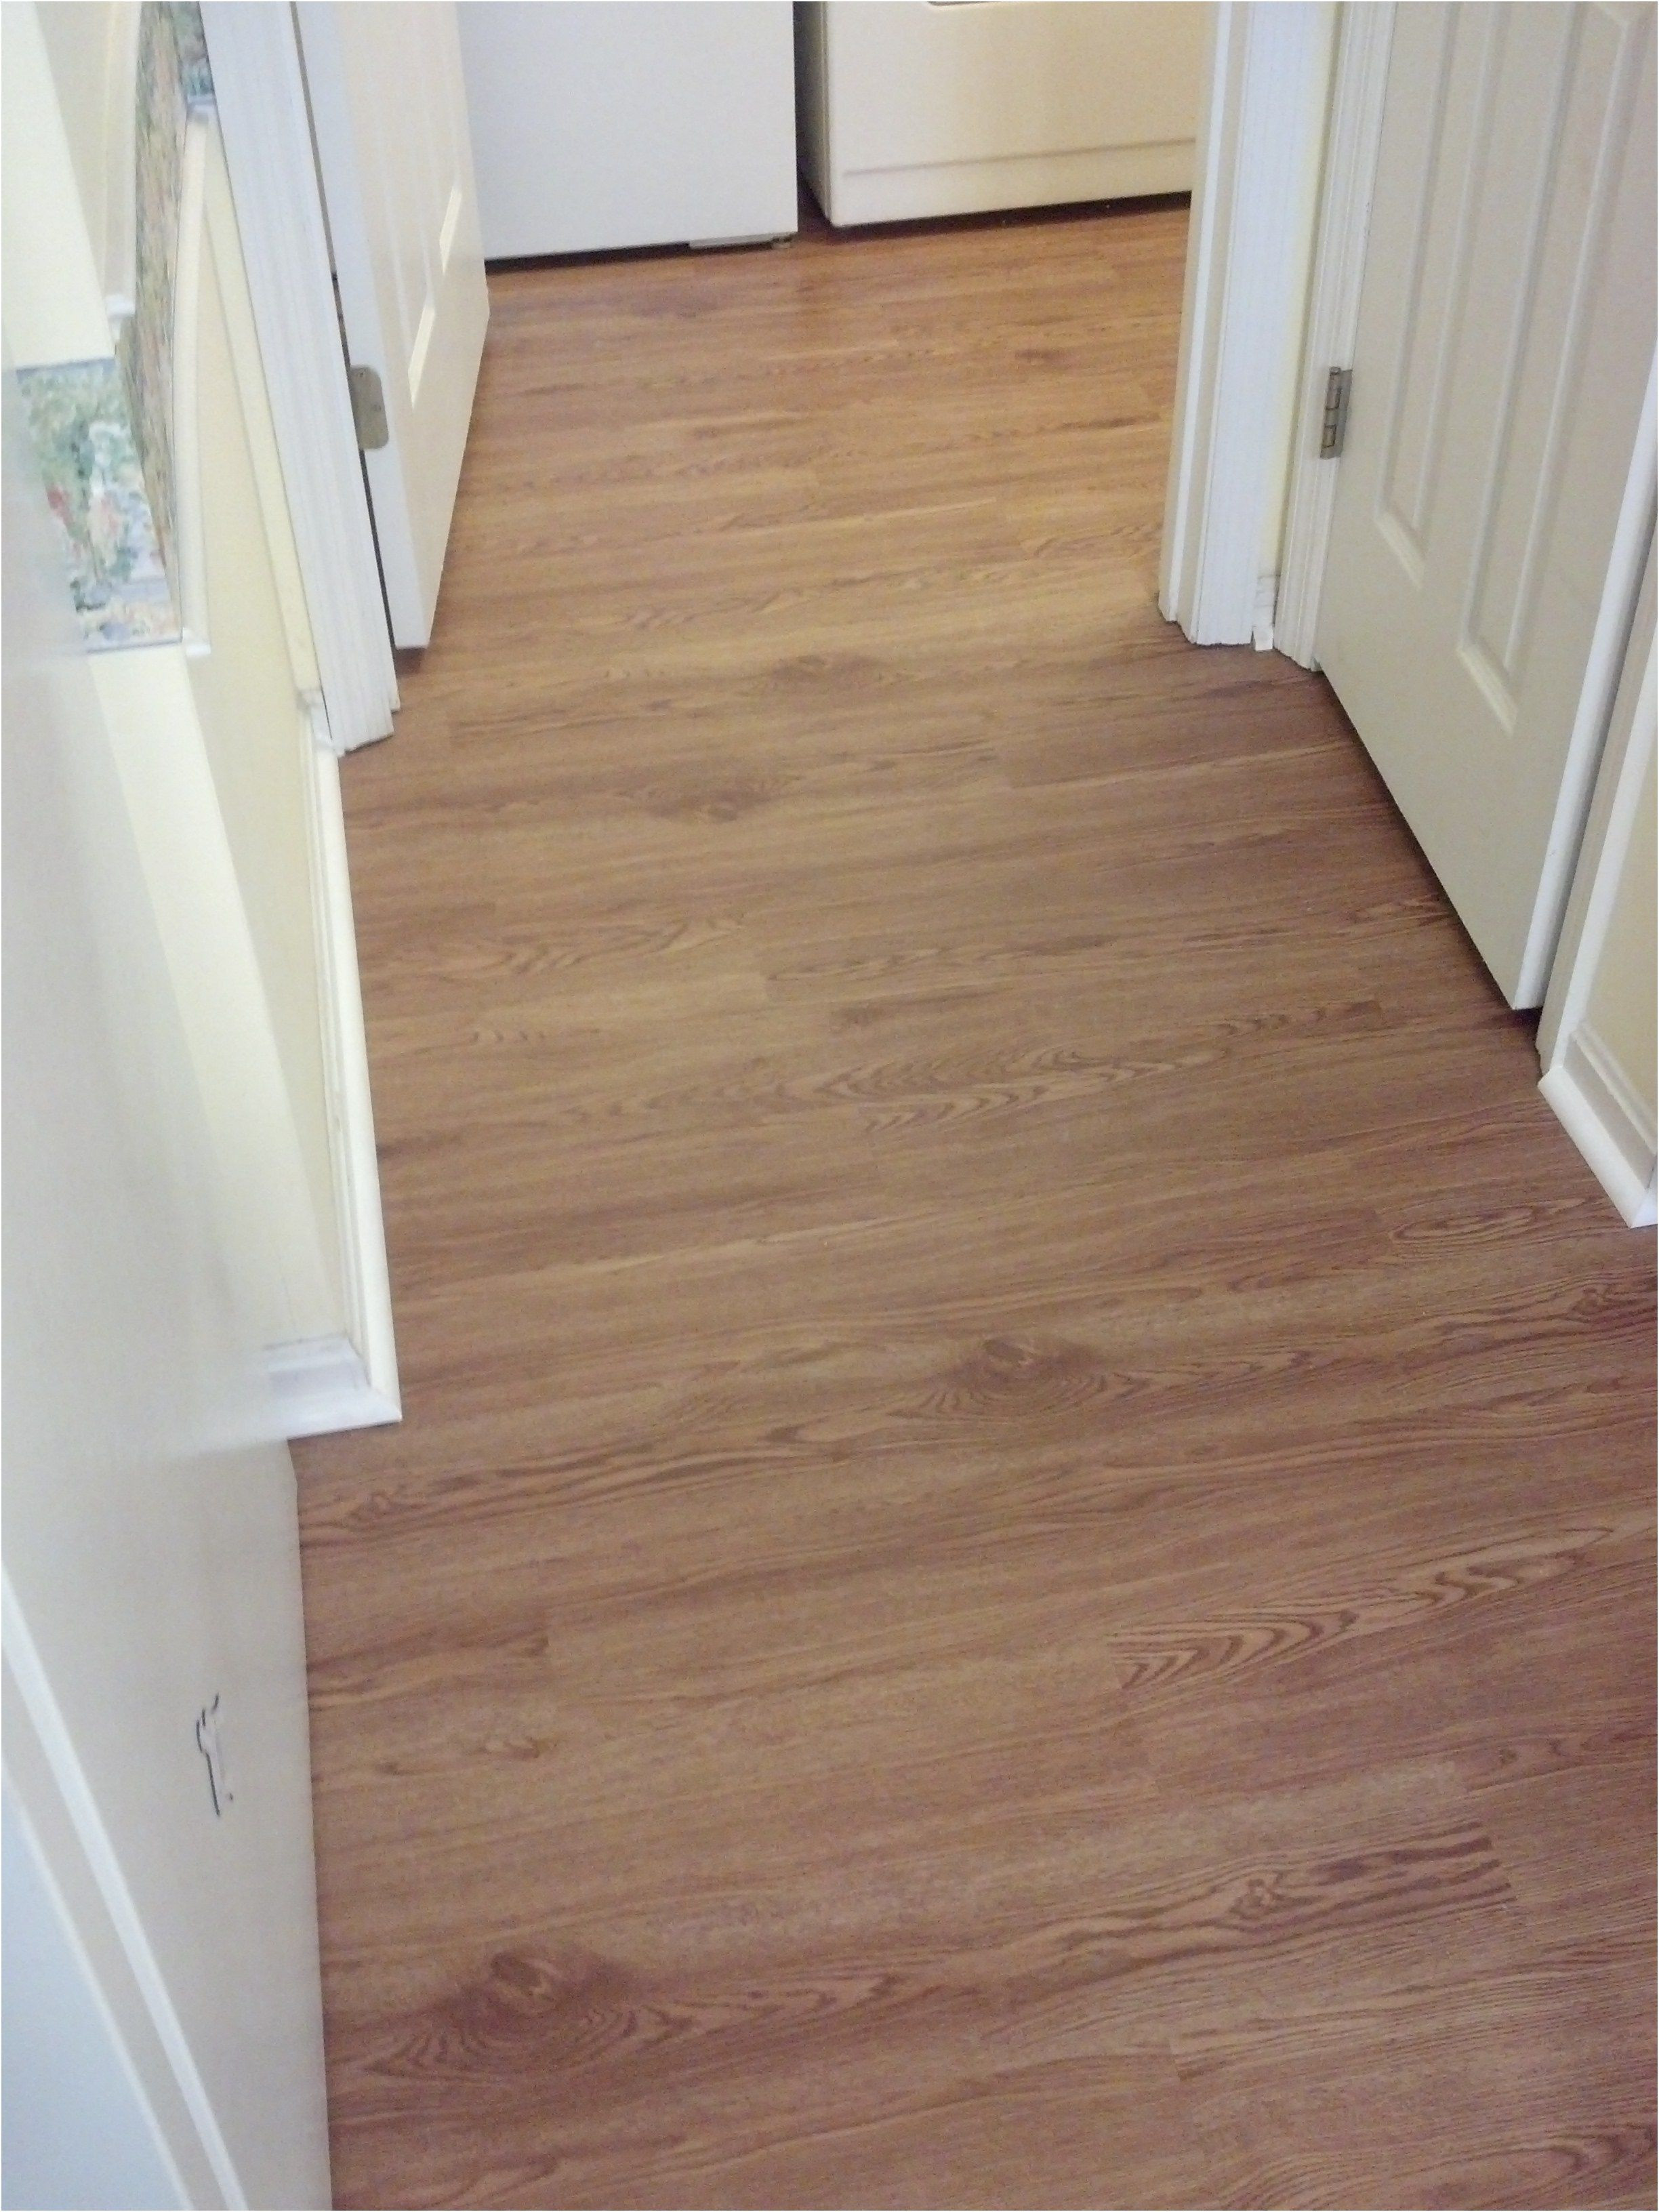 30 attractive Grey solid Hardwood Floors 2024 free download grey solid hardwood floors of hardwood flooring companies near me floor plan ideas intended for flooring sale near me stock 0d grace place barnegat nj inspiration flooring sale near me